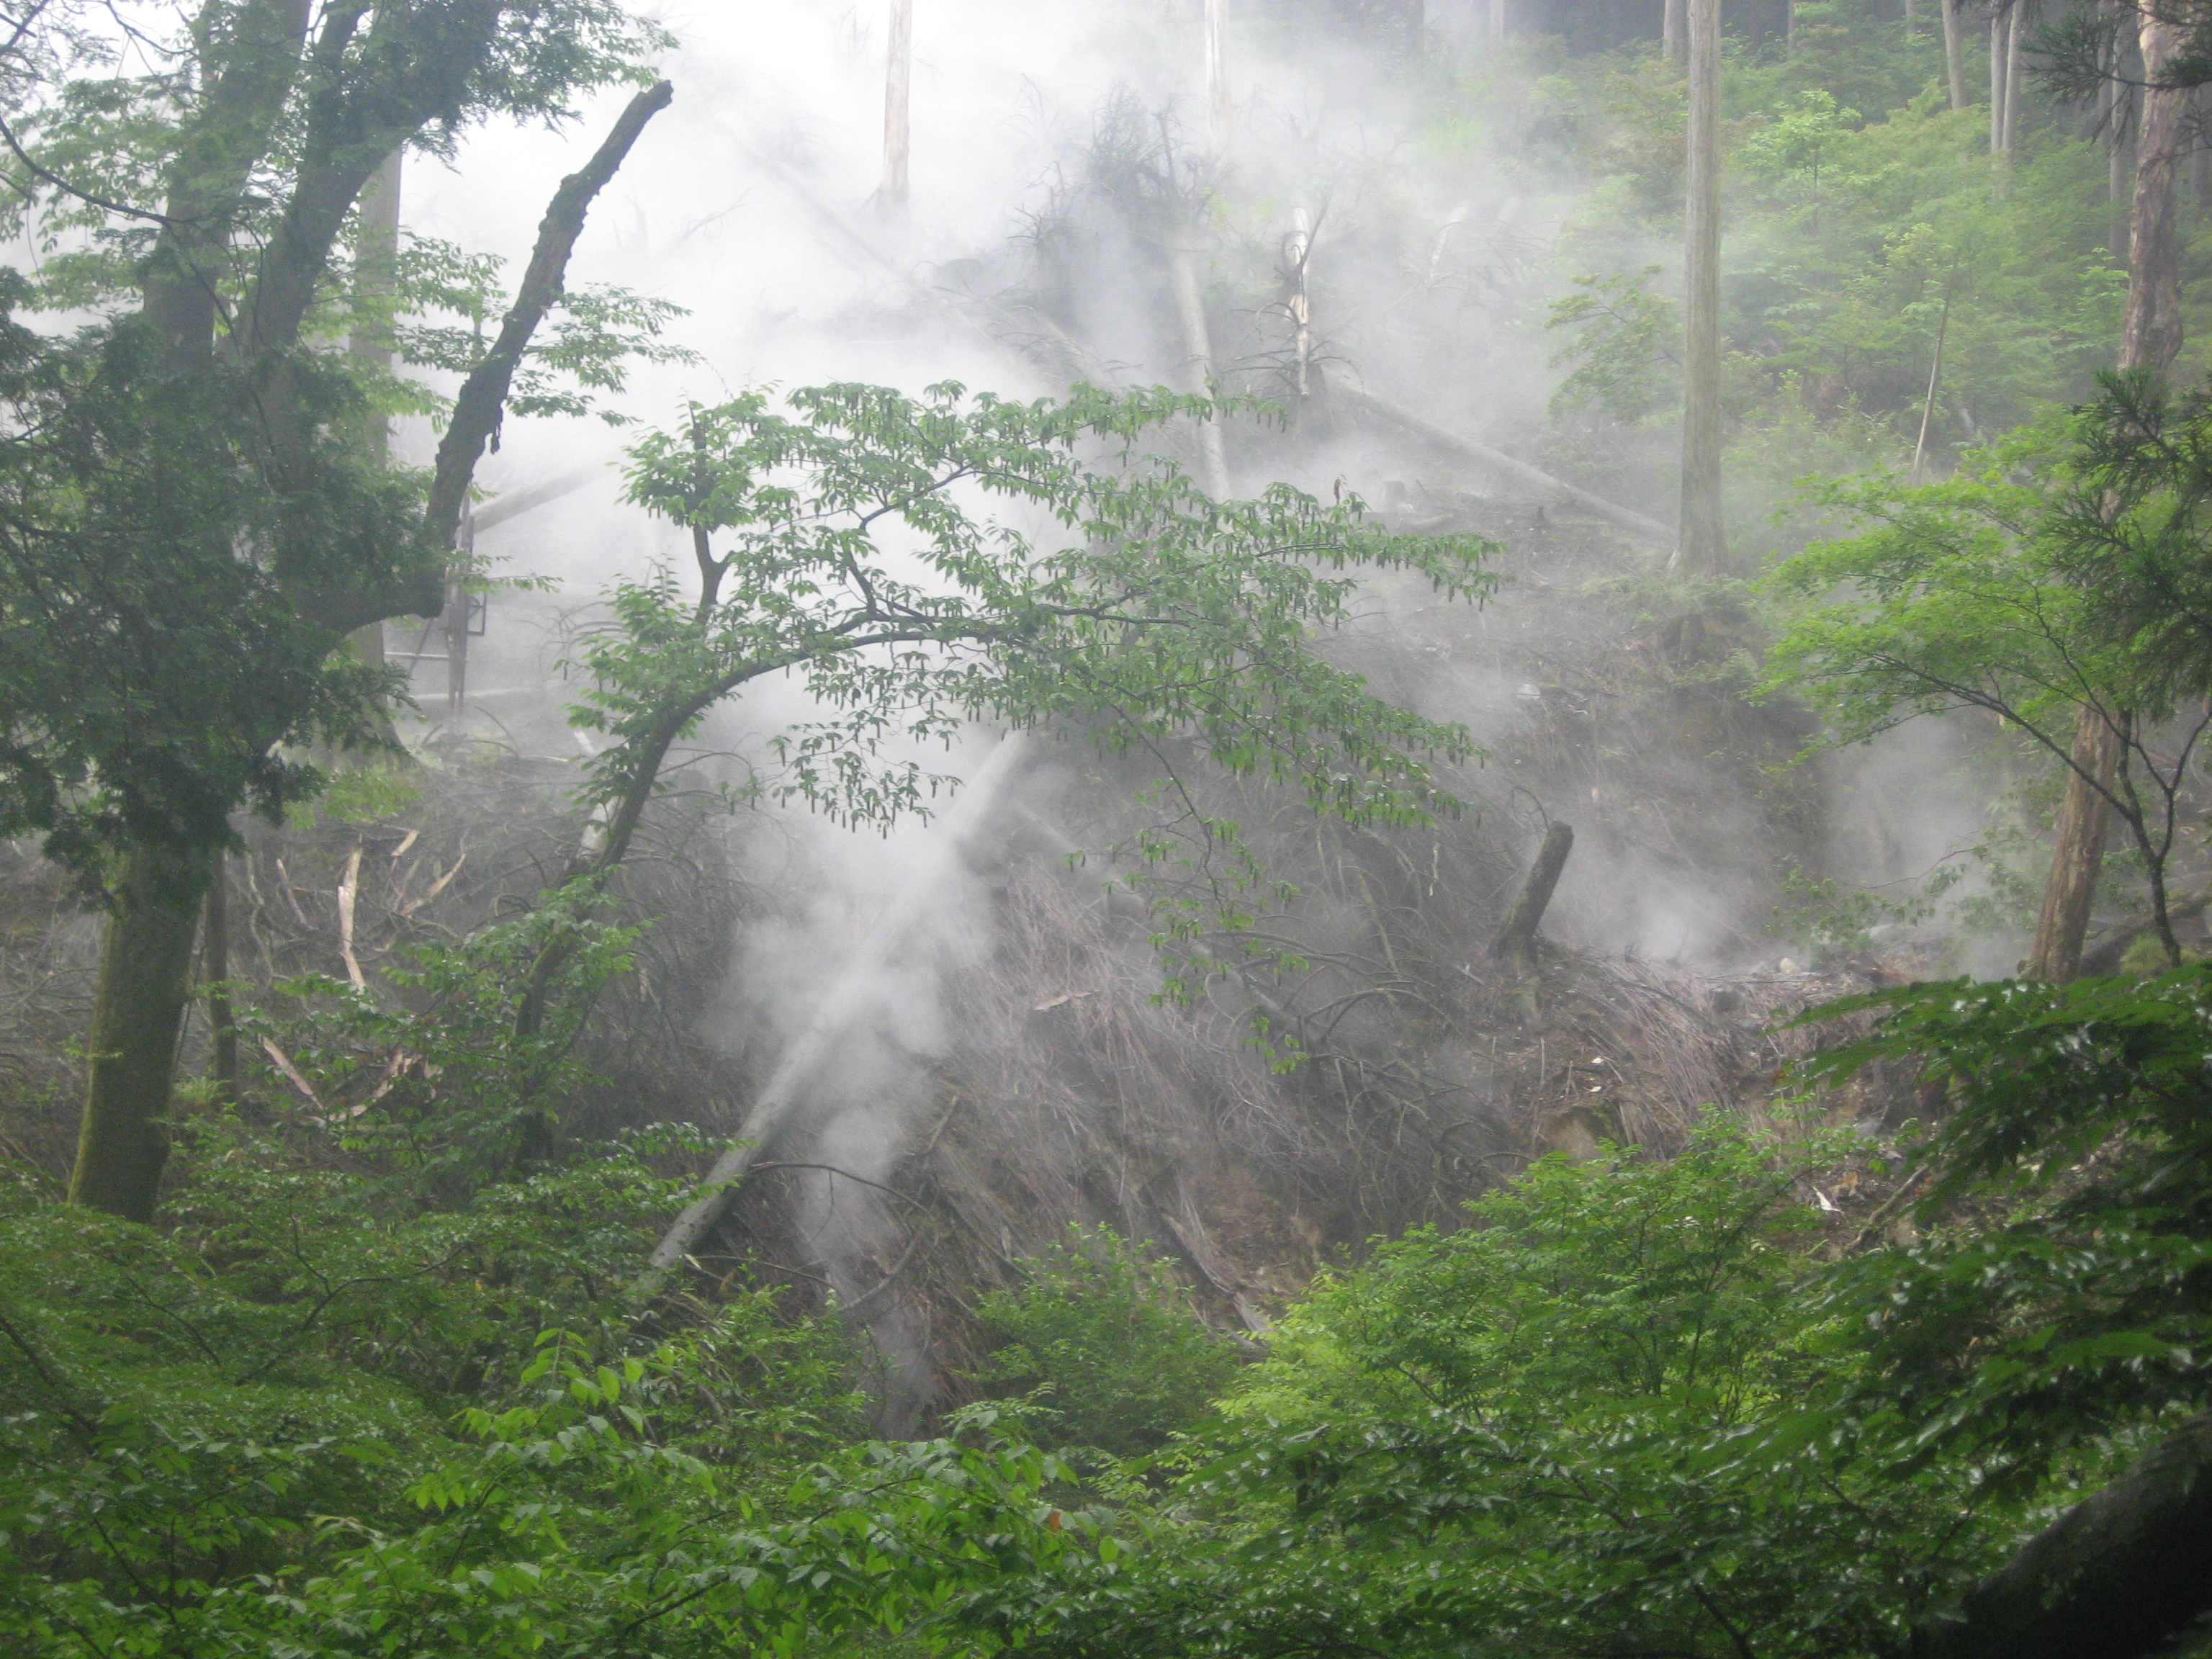 Around Mt. Fuji. Steam comes out of the ground everywhere. 